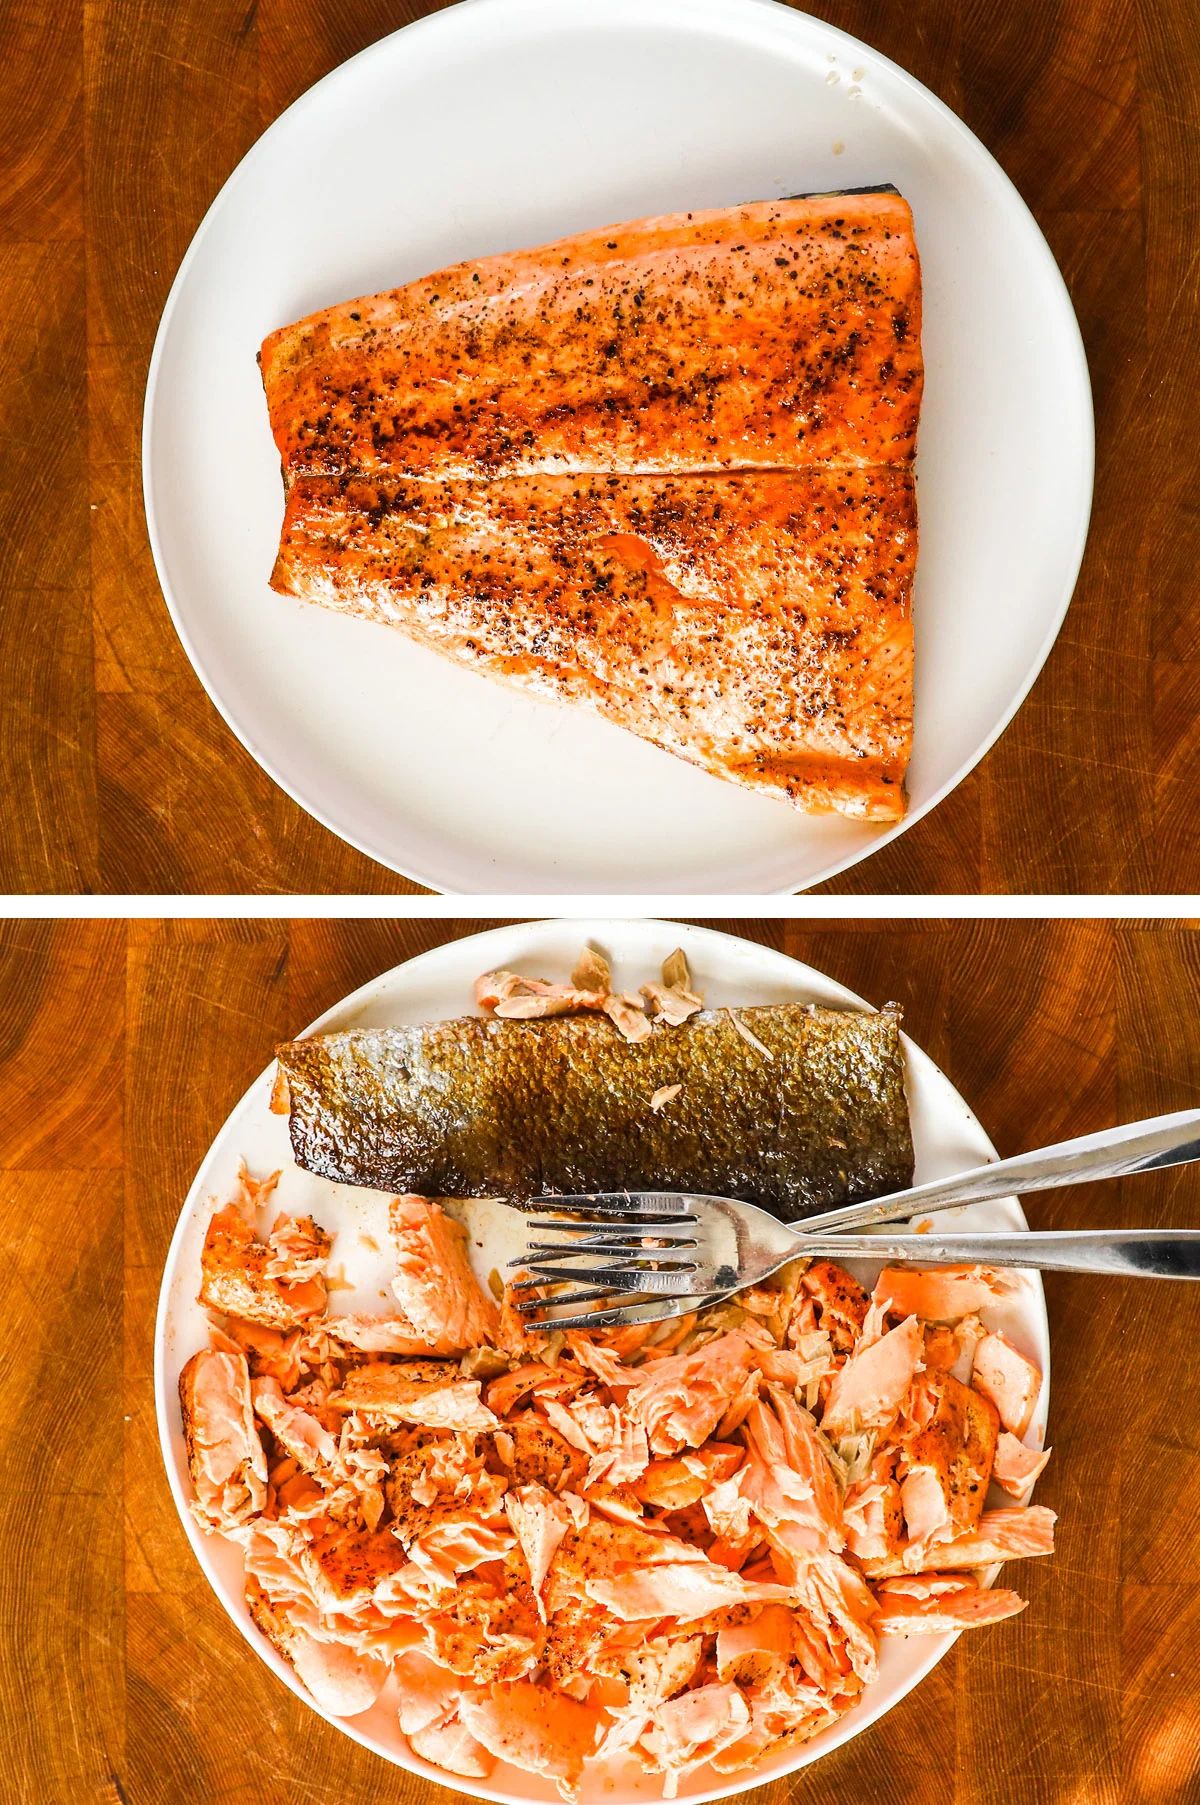 A plate of cooked salmon, and flaked salmon pieces with skin removed and two forks